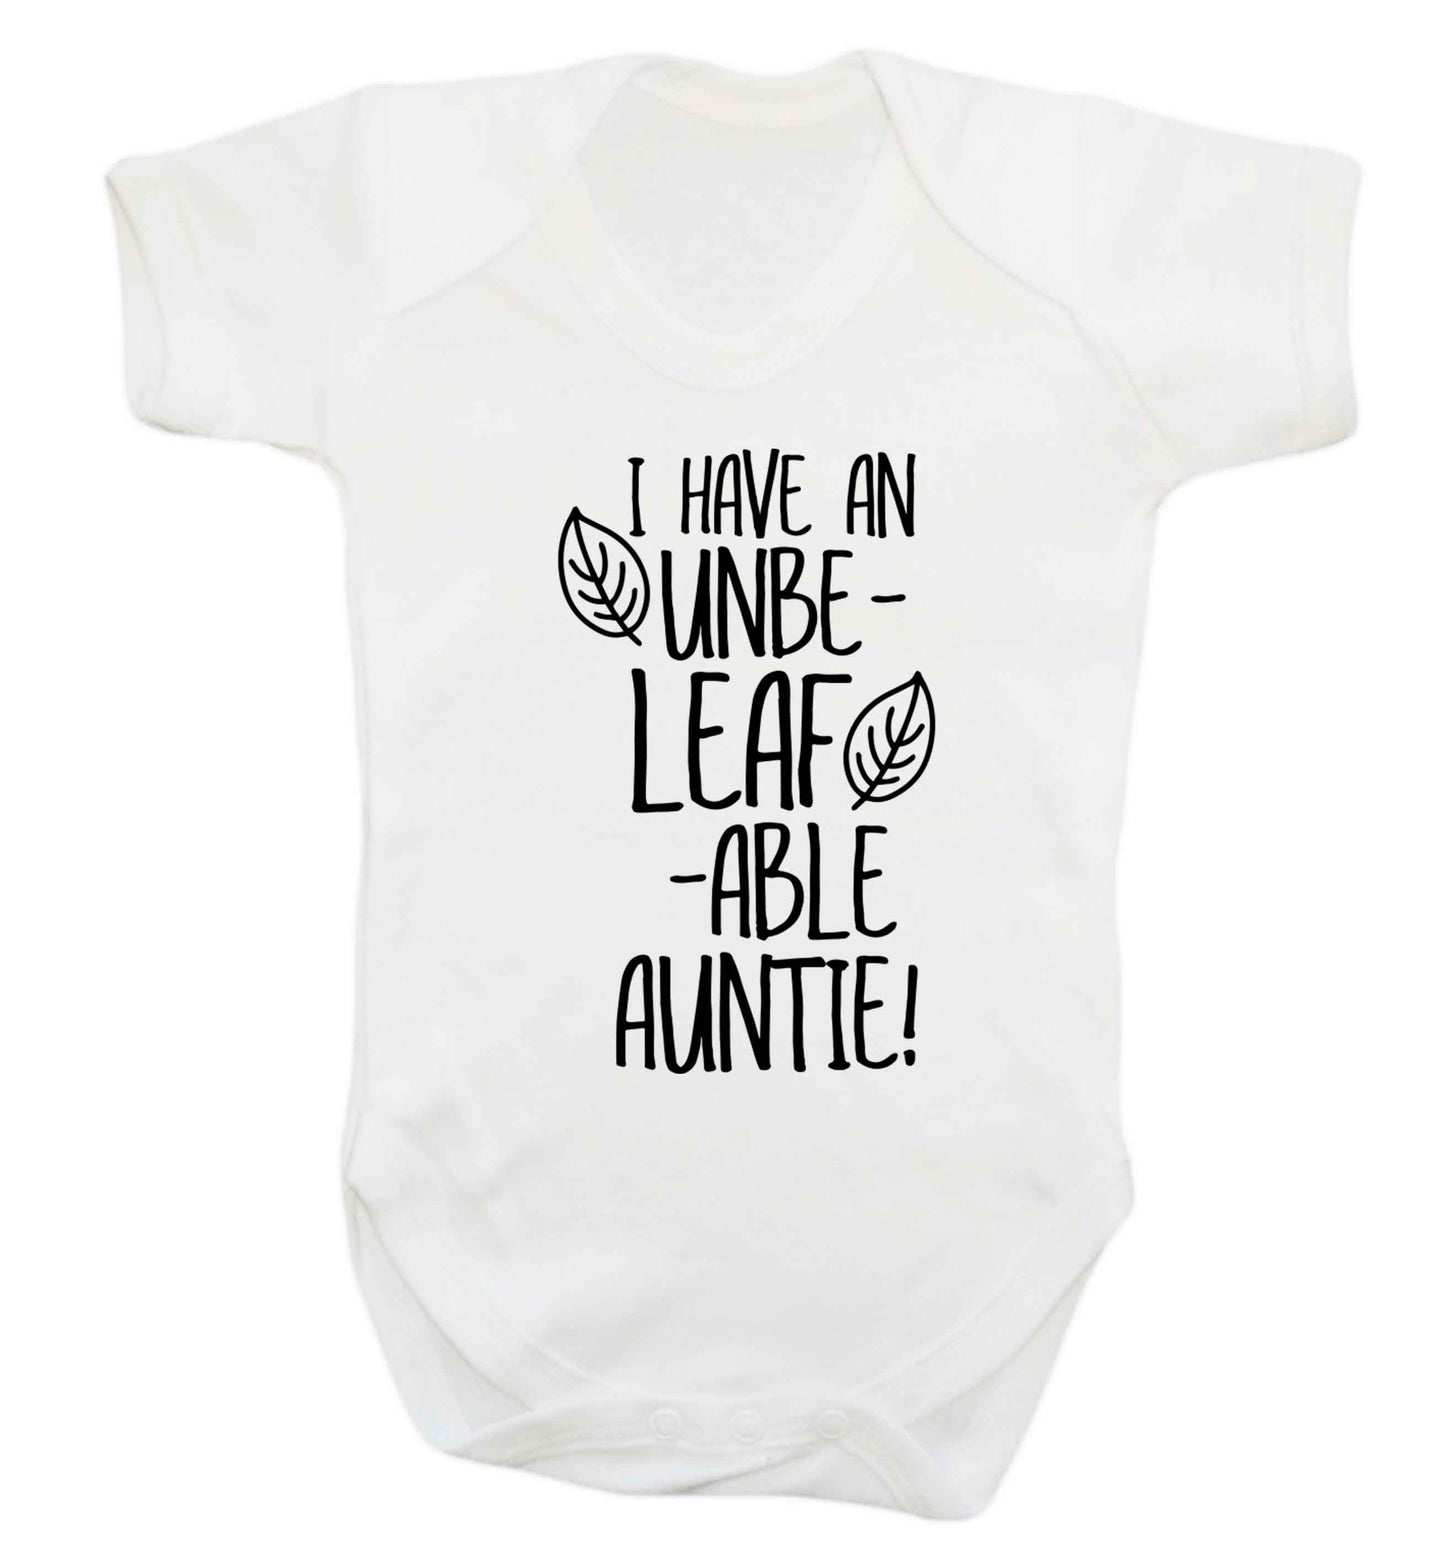 I have an unbe-leaf-able auntie Baby Vest white 18-24 months